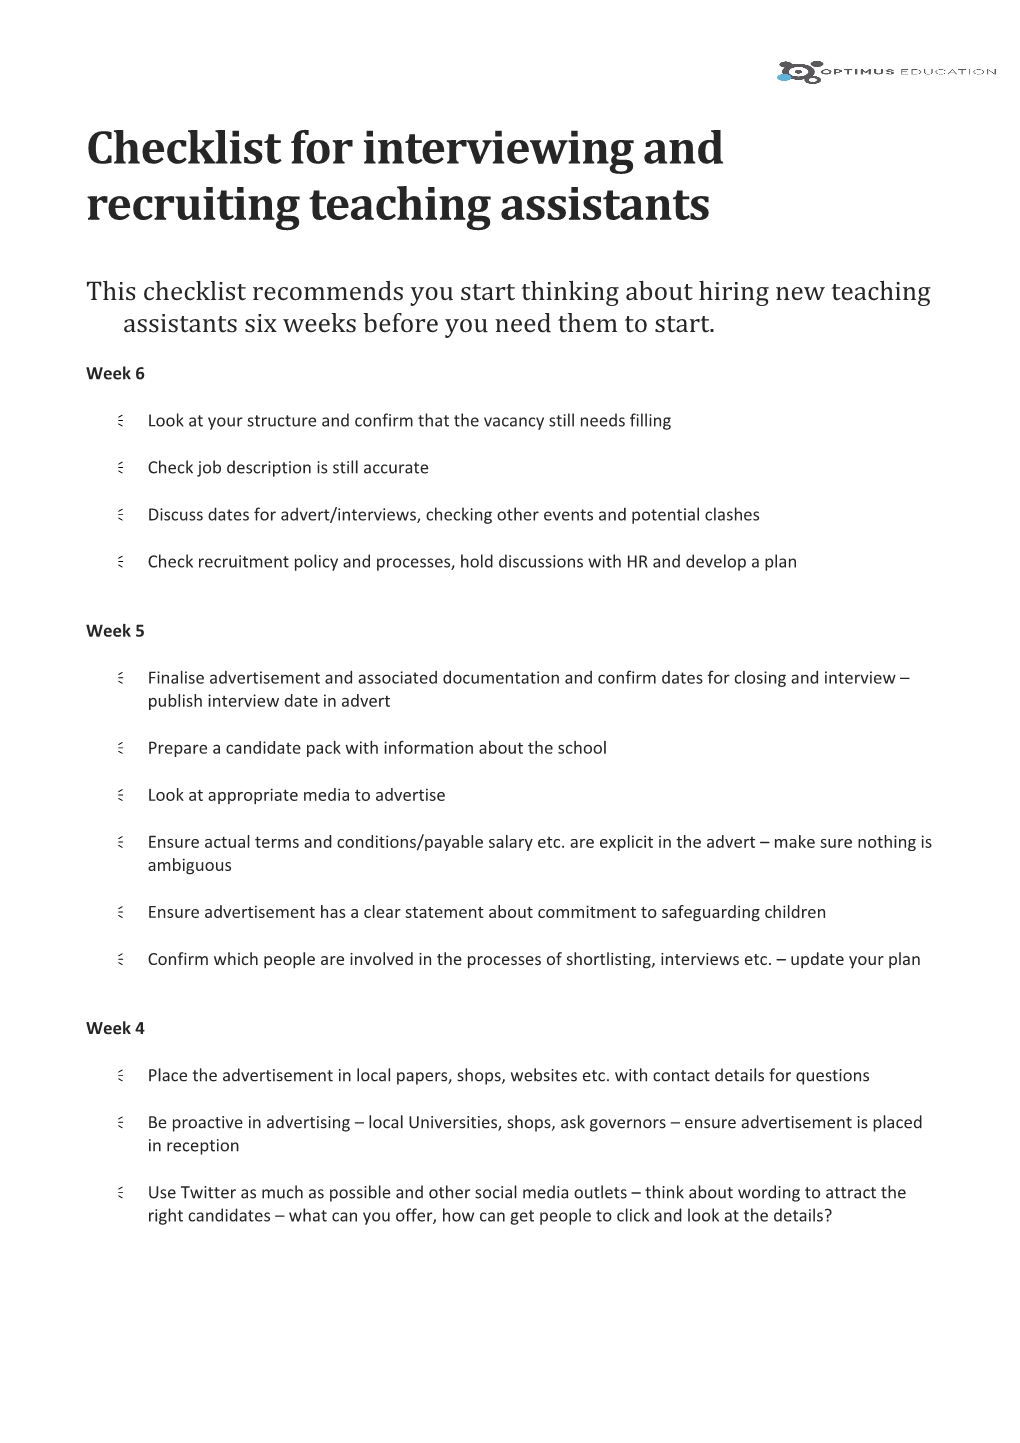 Checklist for Interviewing and Recruiting Teaching Assistants